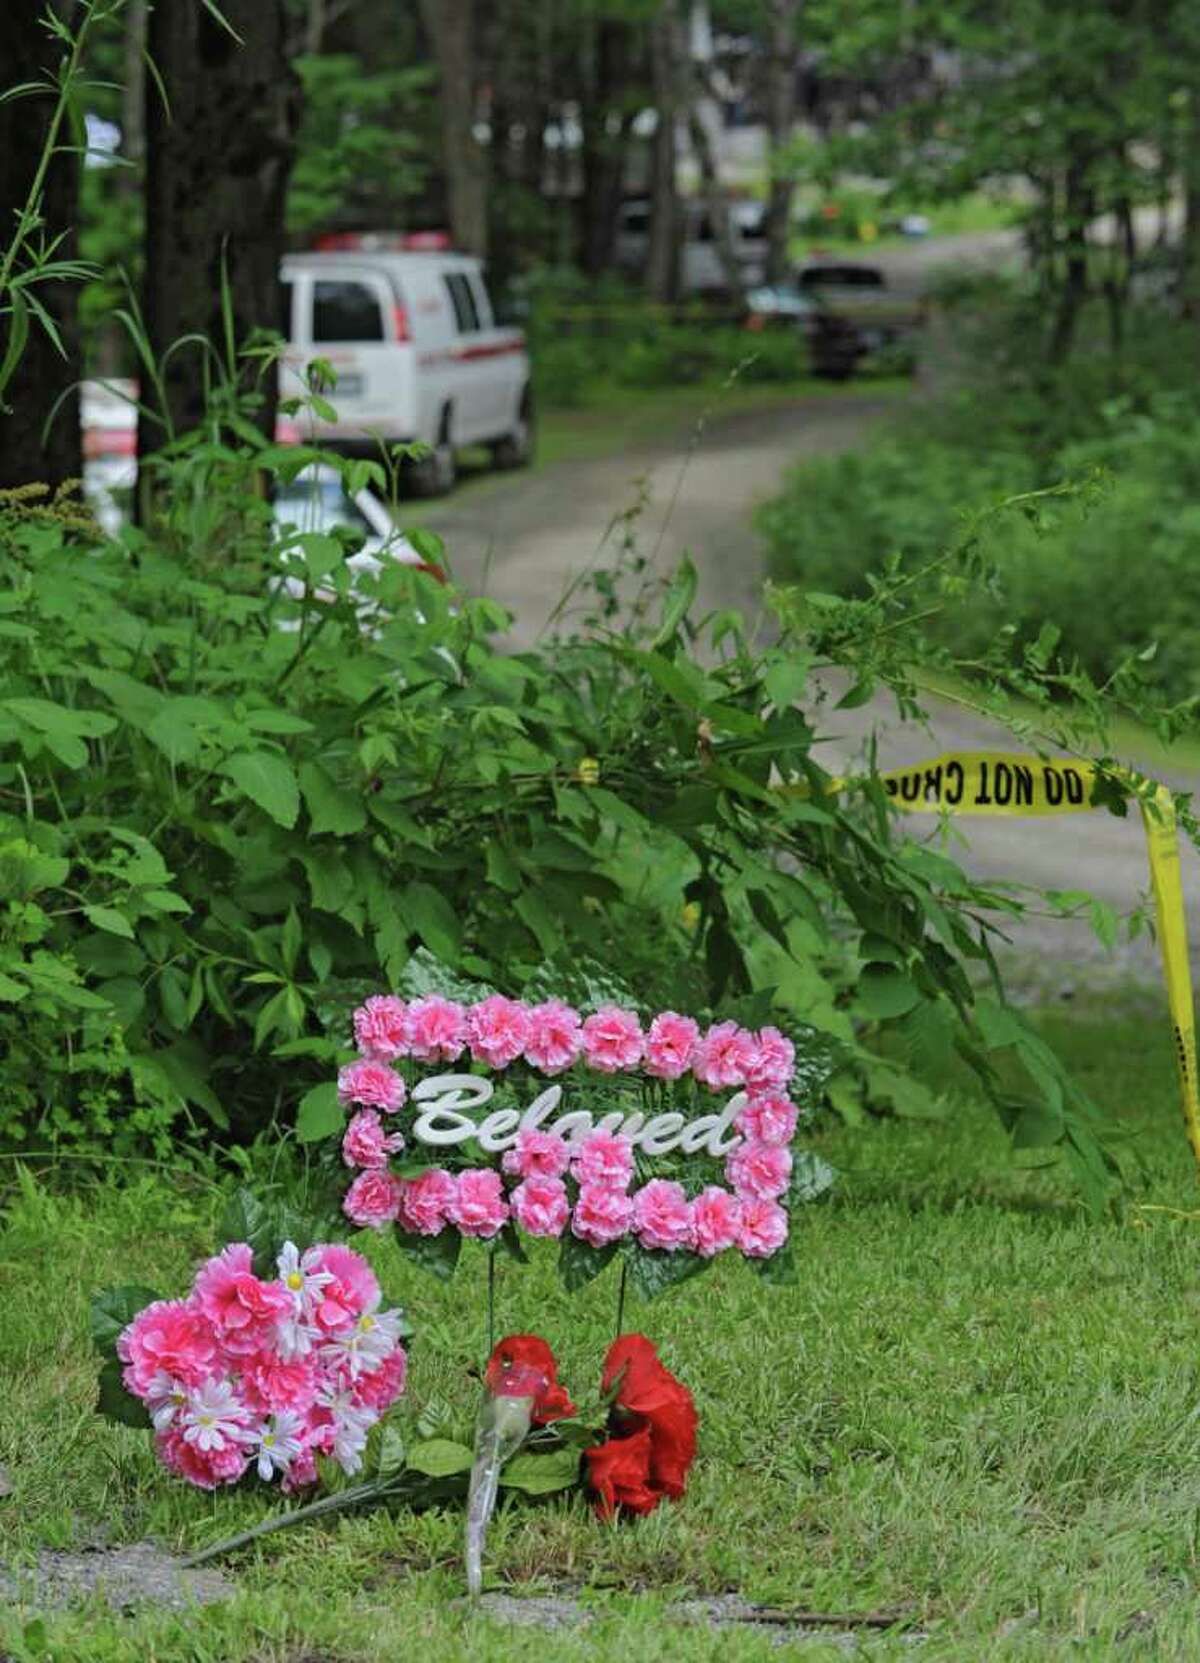 Flowers are left at the end of a driveway on property where authorities said three people were shot to death by Matthew Slocum, who then set the house on fire Wednesday in White Creek. (Lori Van Buren / Times Union)